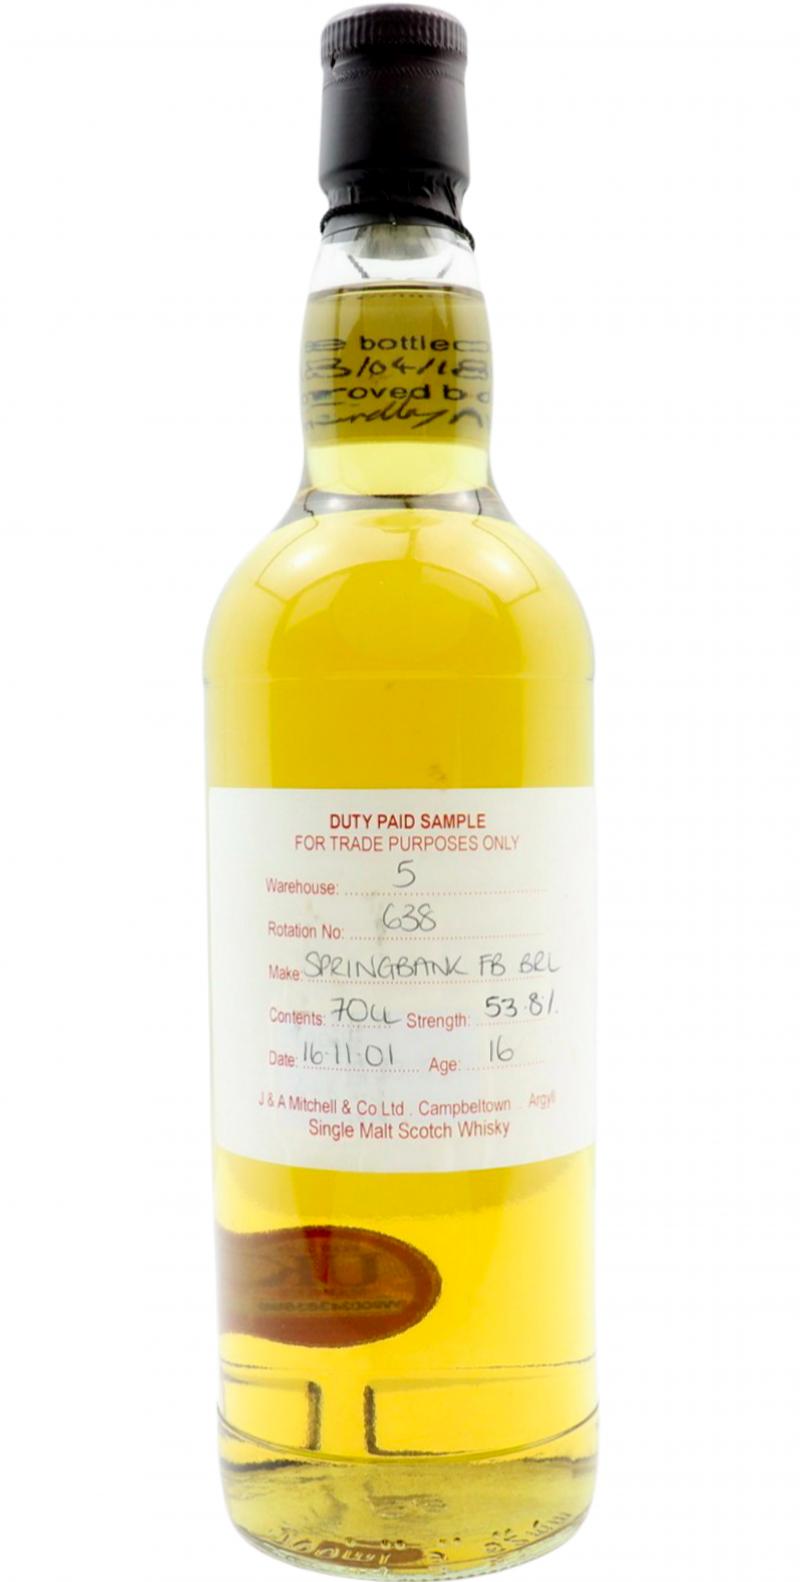 Springbank 2001 Duty Paid Sample For Trade Purposes Only Fresh Bourbon Barrel Rotation 638 53.8% 700ml